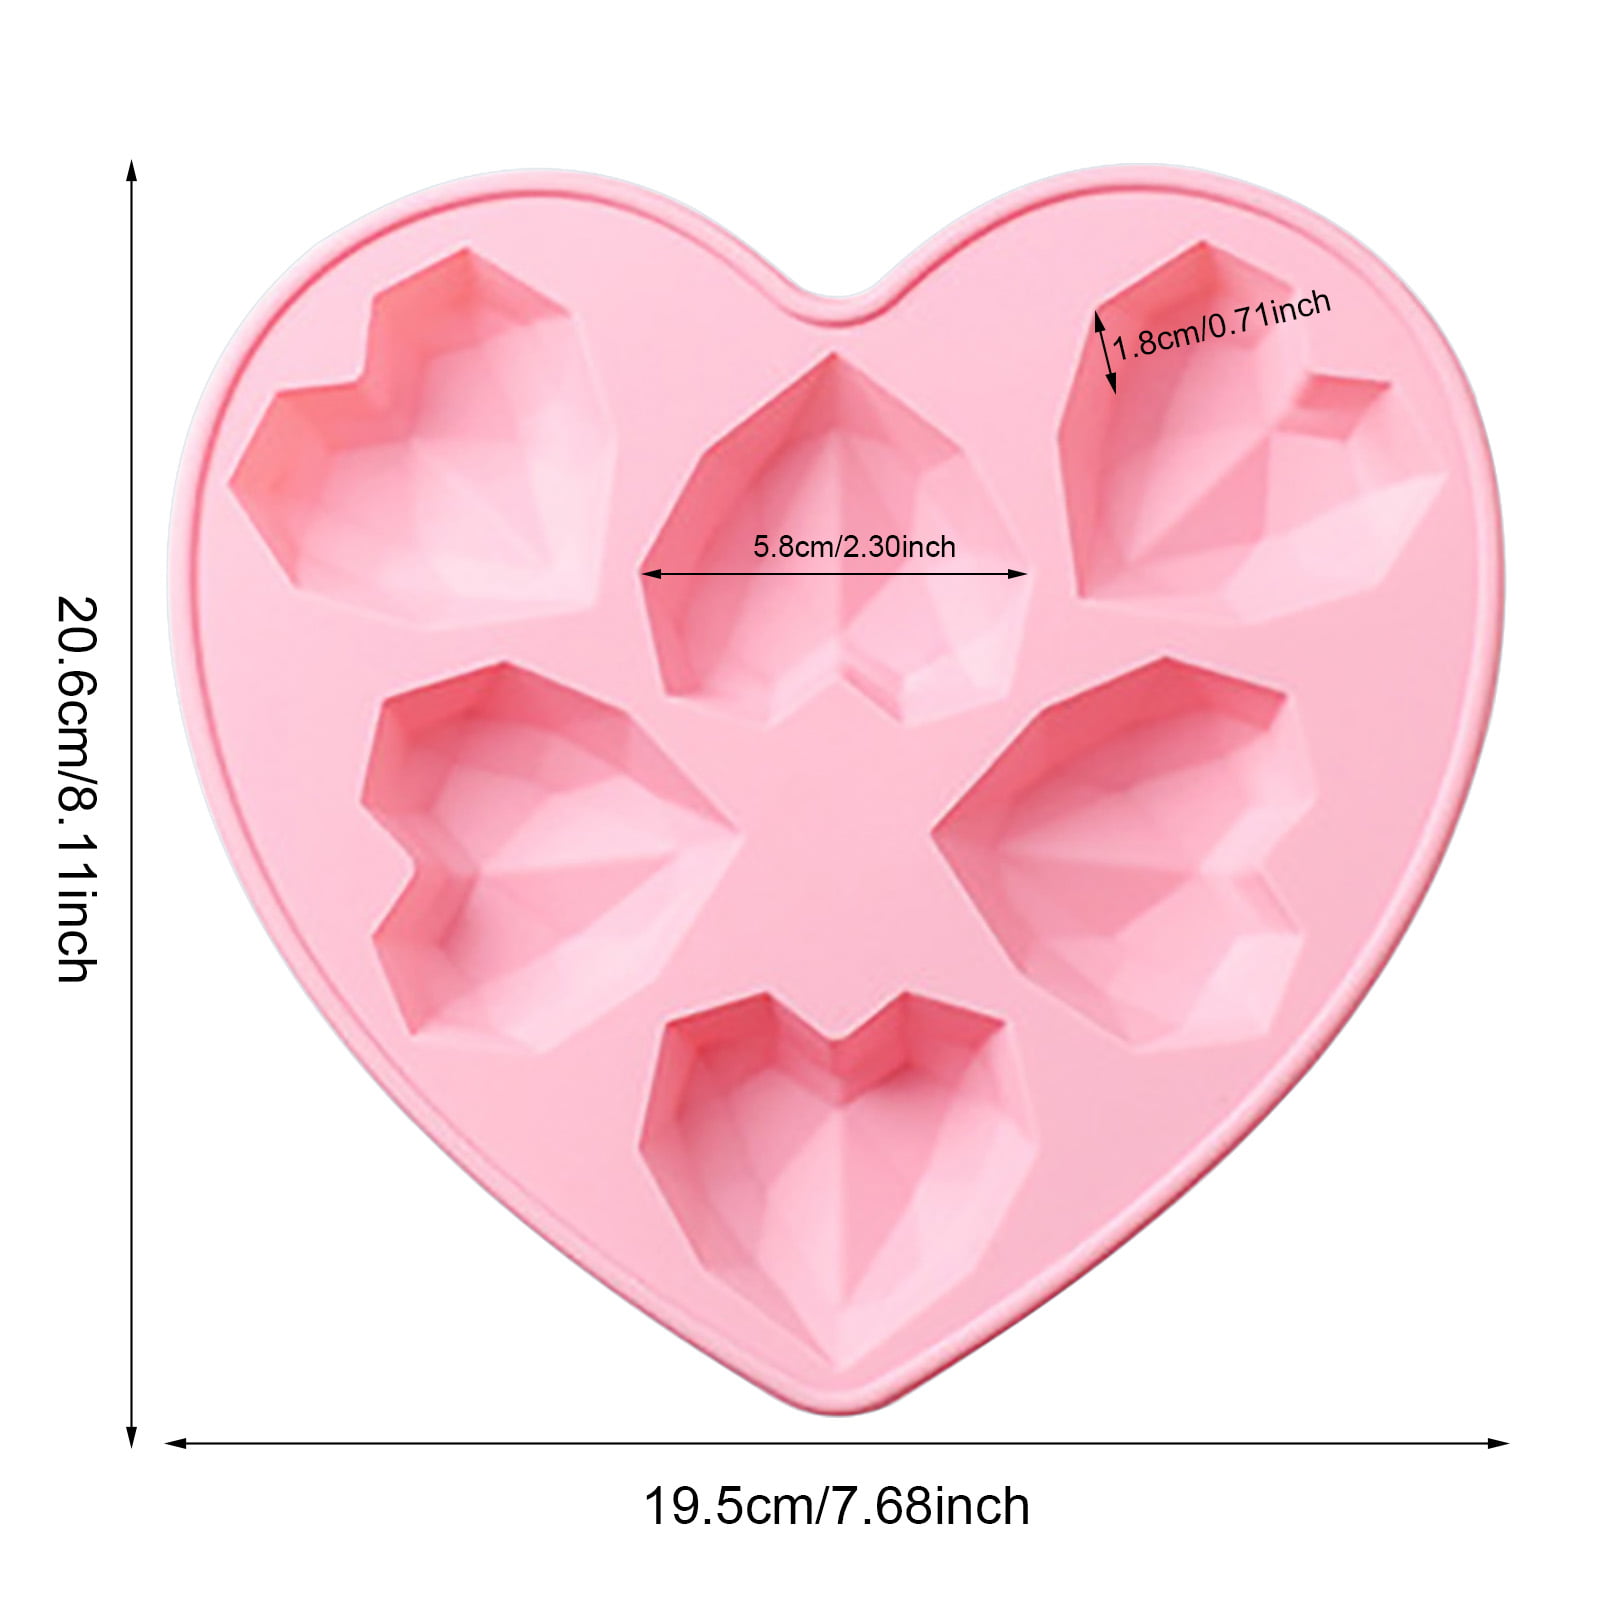 3D Love Heart Cake Fondant Silicone Mold Baking Decorating Mould S5H6 